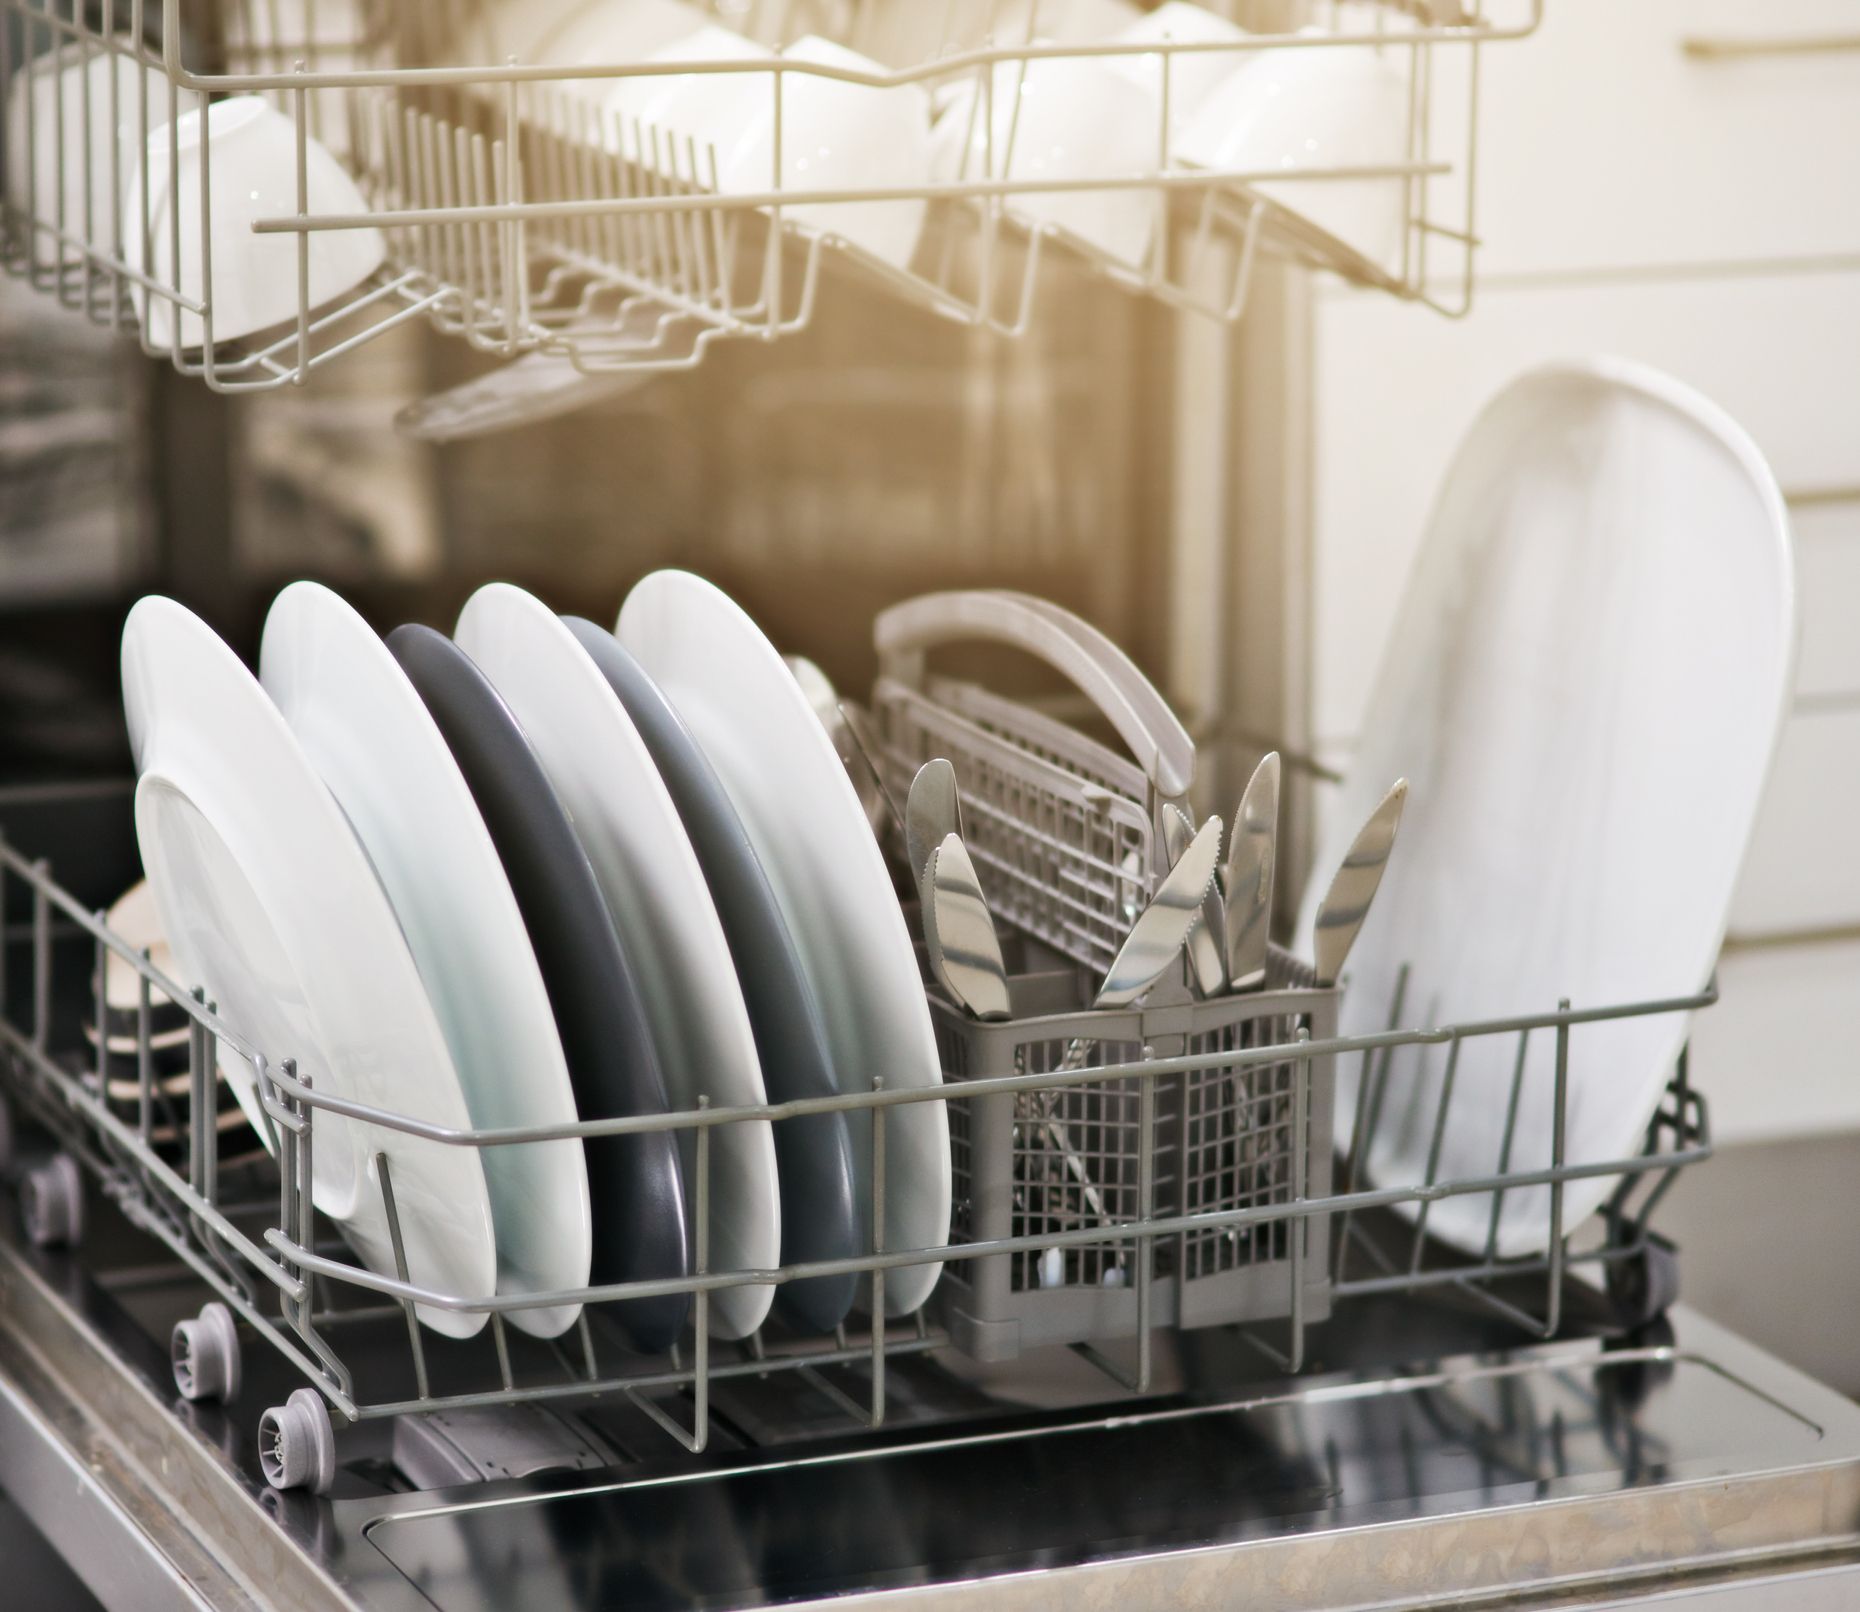 The Best Way to Clean a Dishwasher (Tested & Approved)